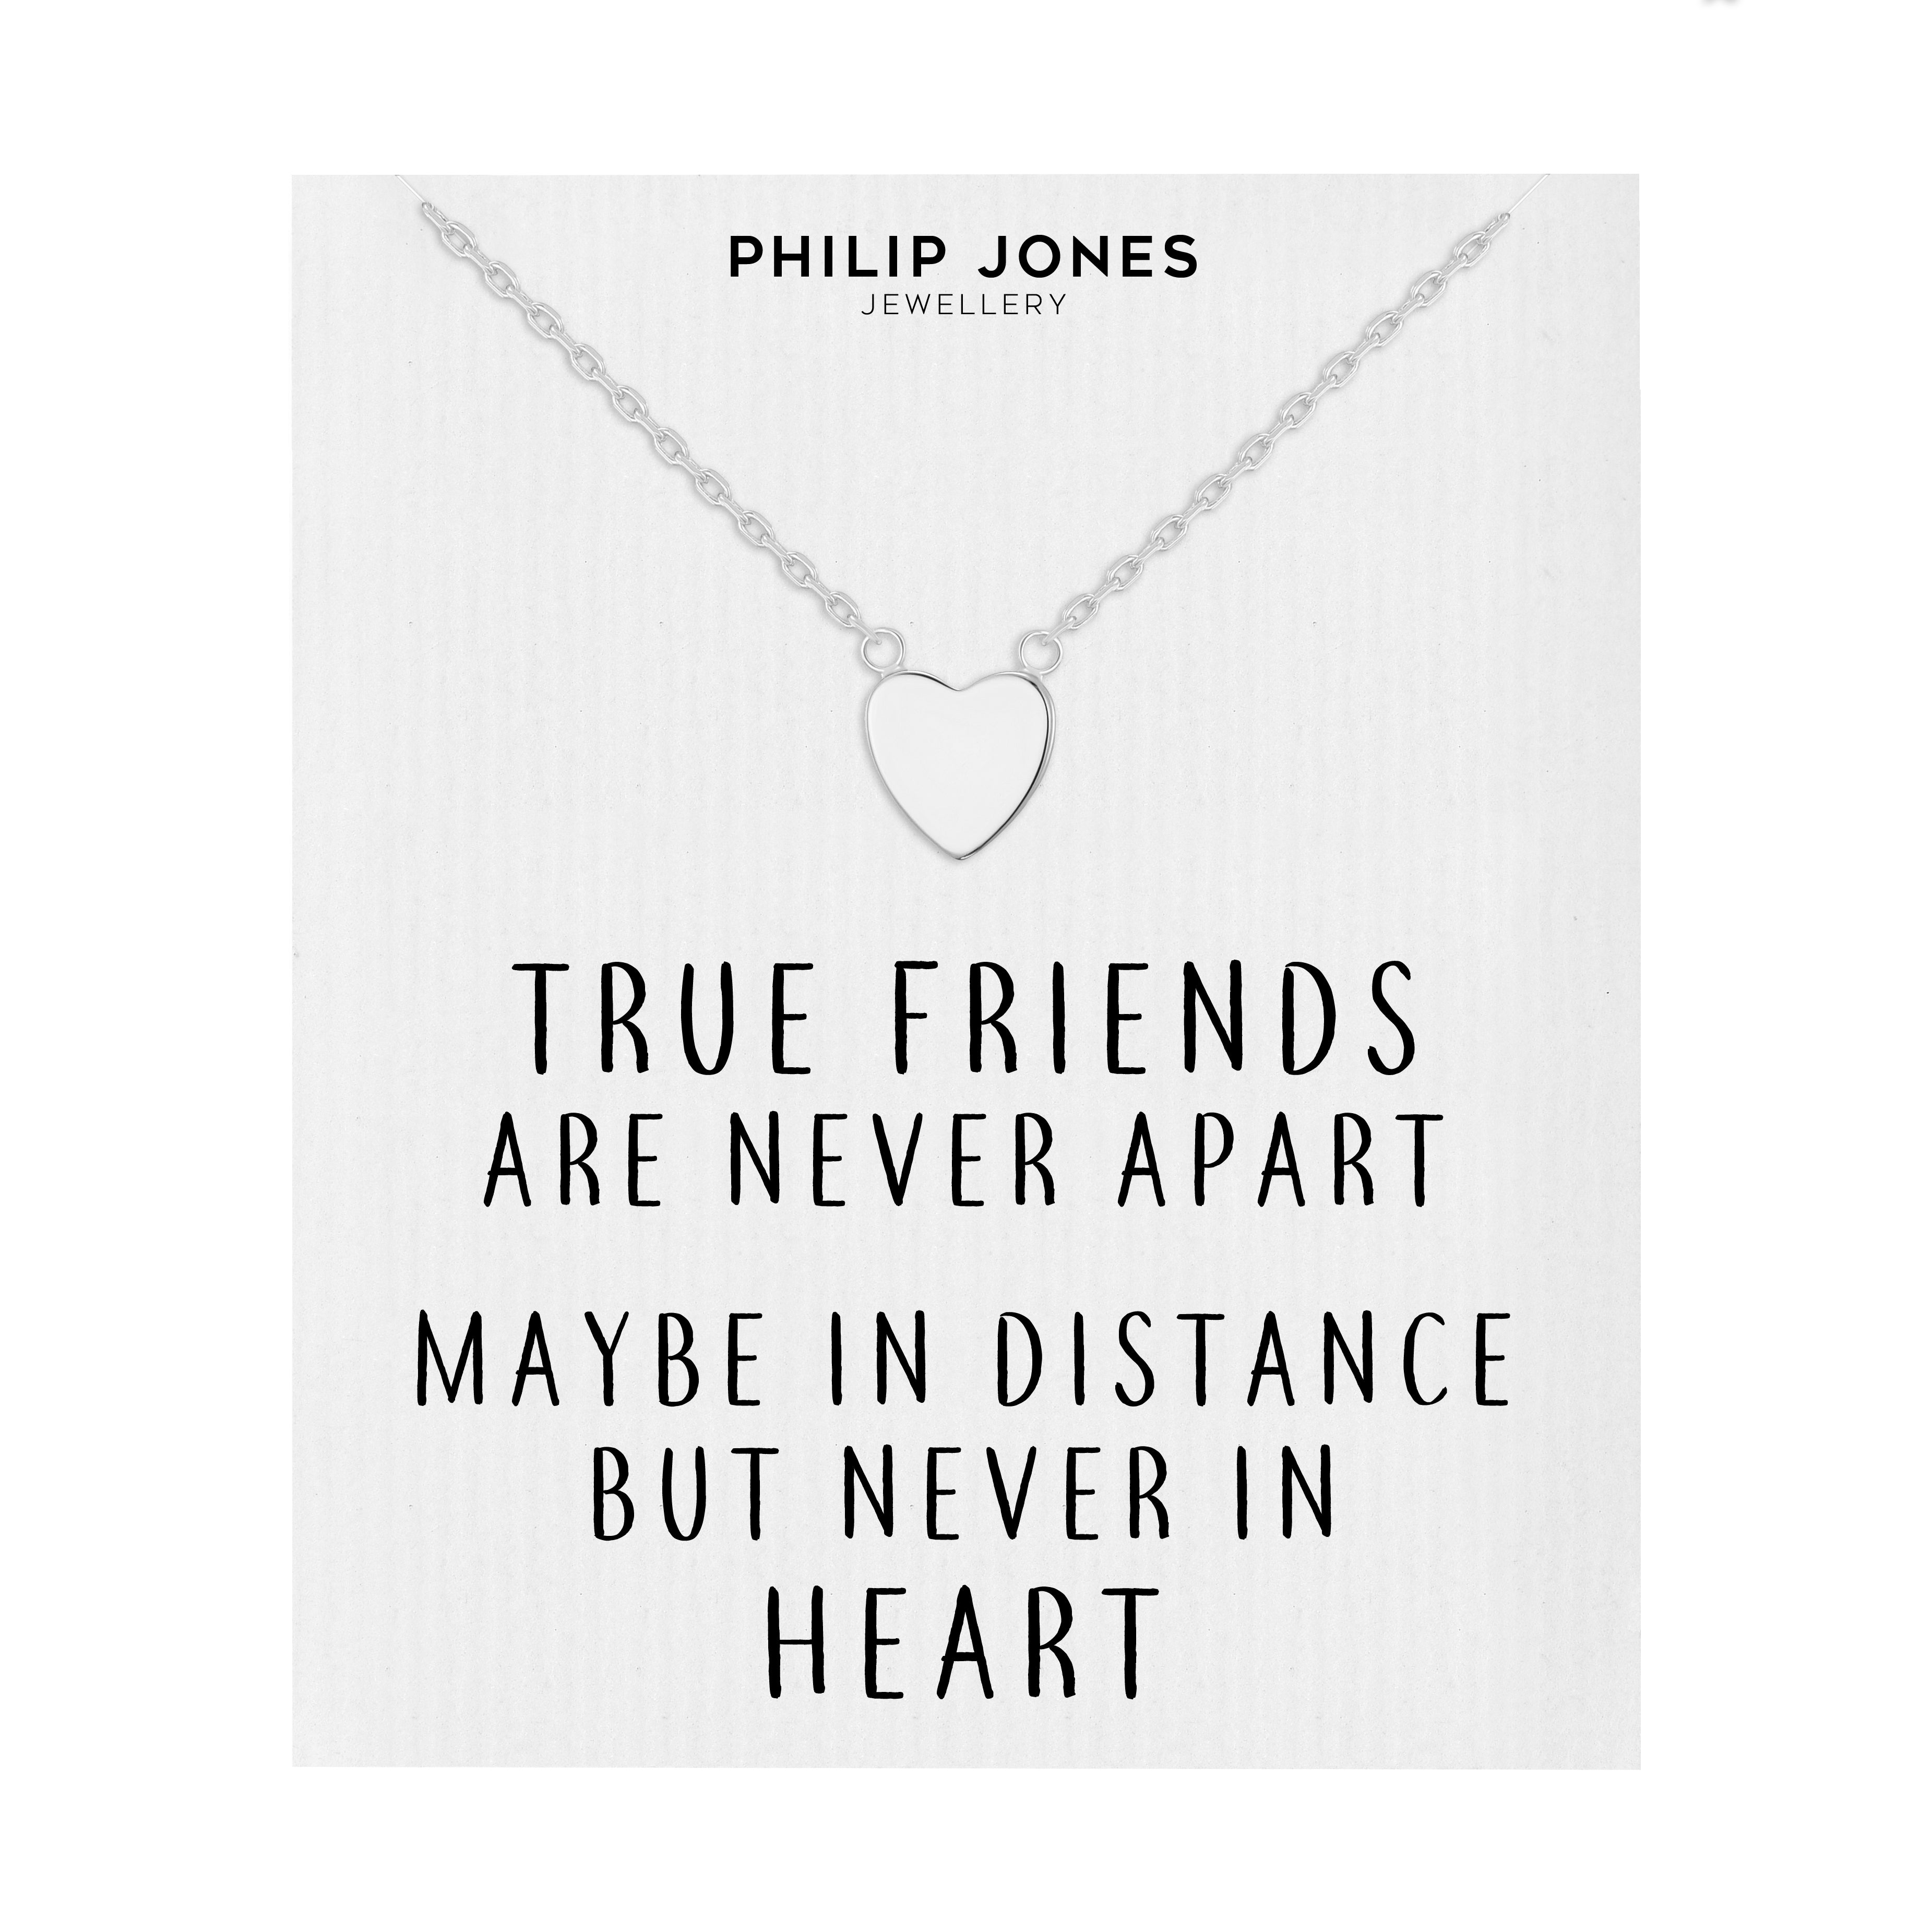 Silver Plated Heart Necklace with Quote Card by Philip Jones Jewellery